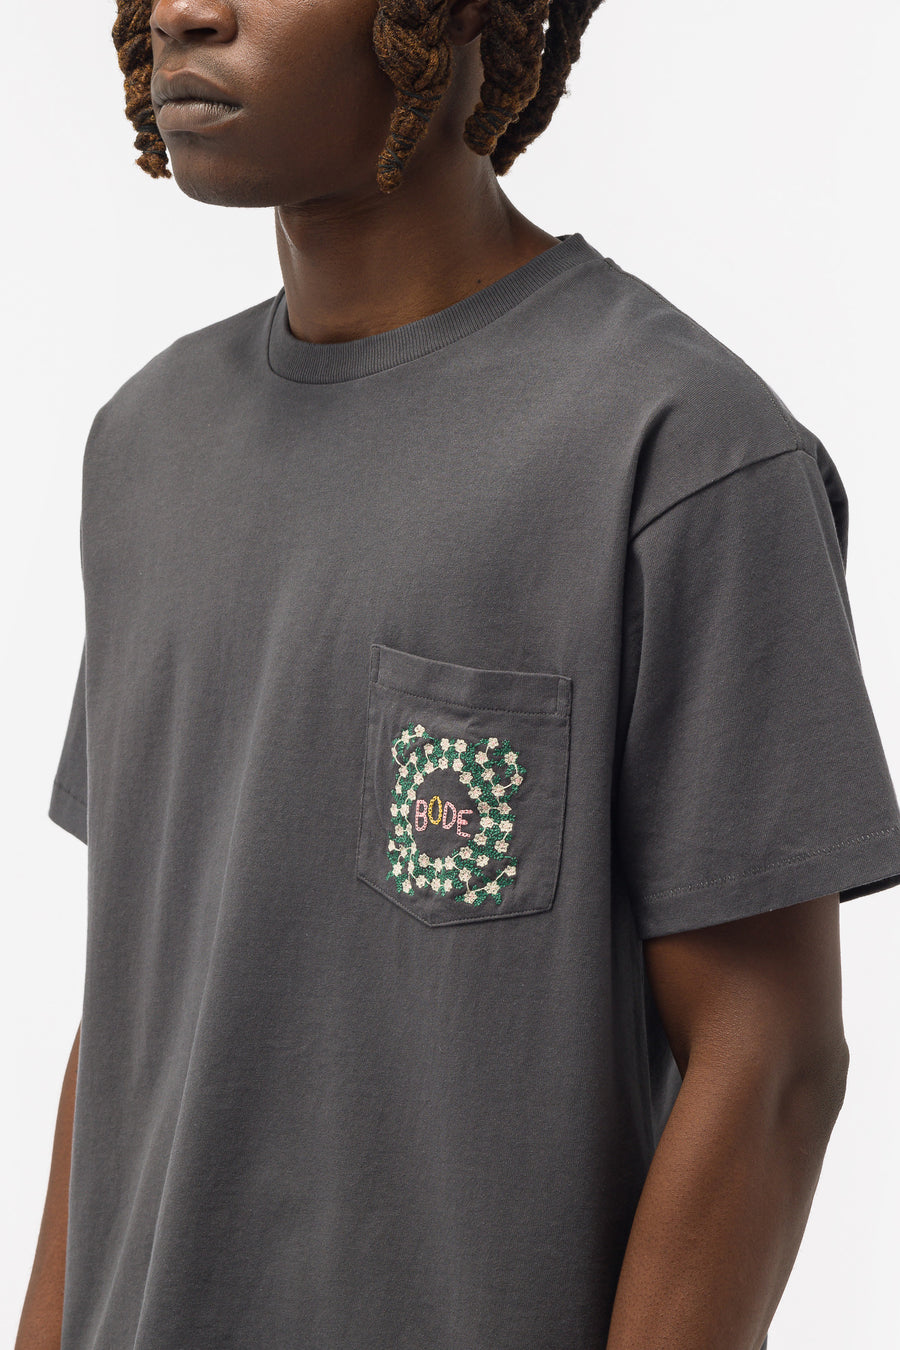 Bode - Men's Daisy Never Tell Pocket Tee in Charcoal